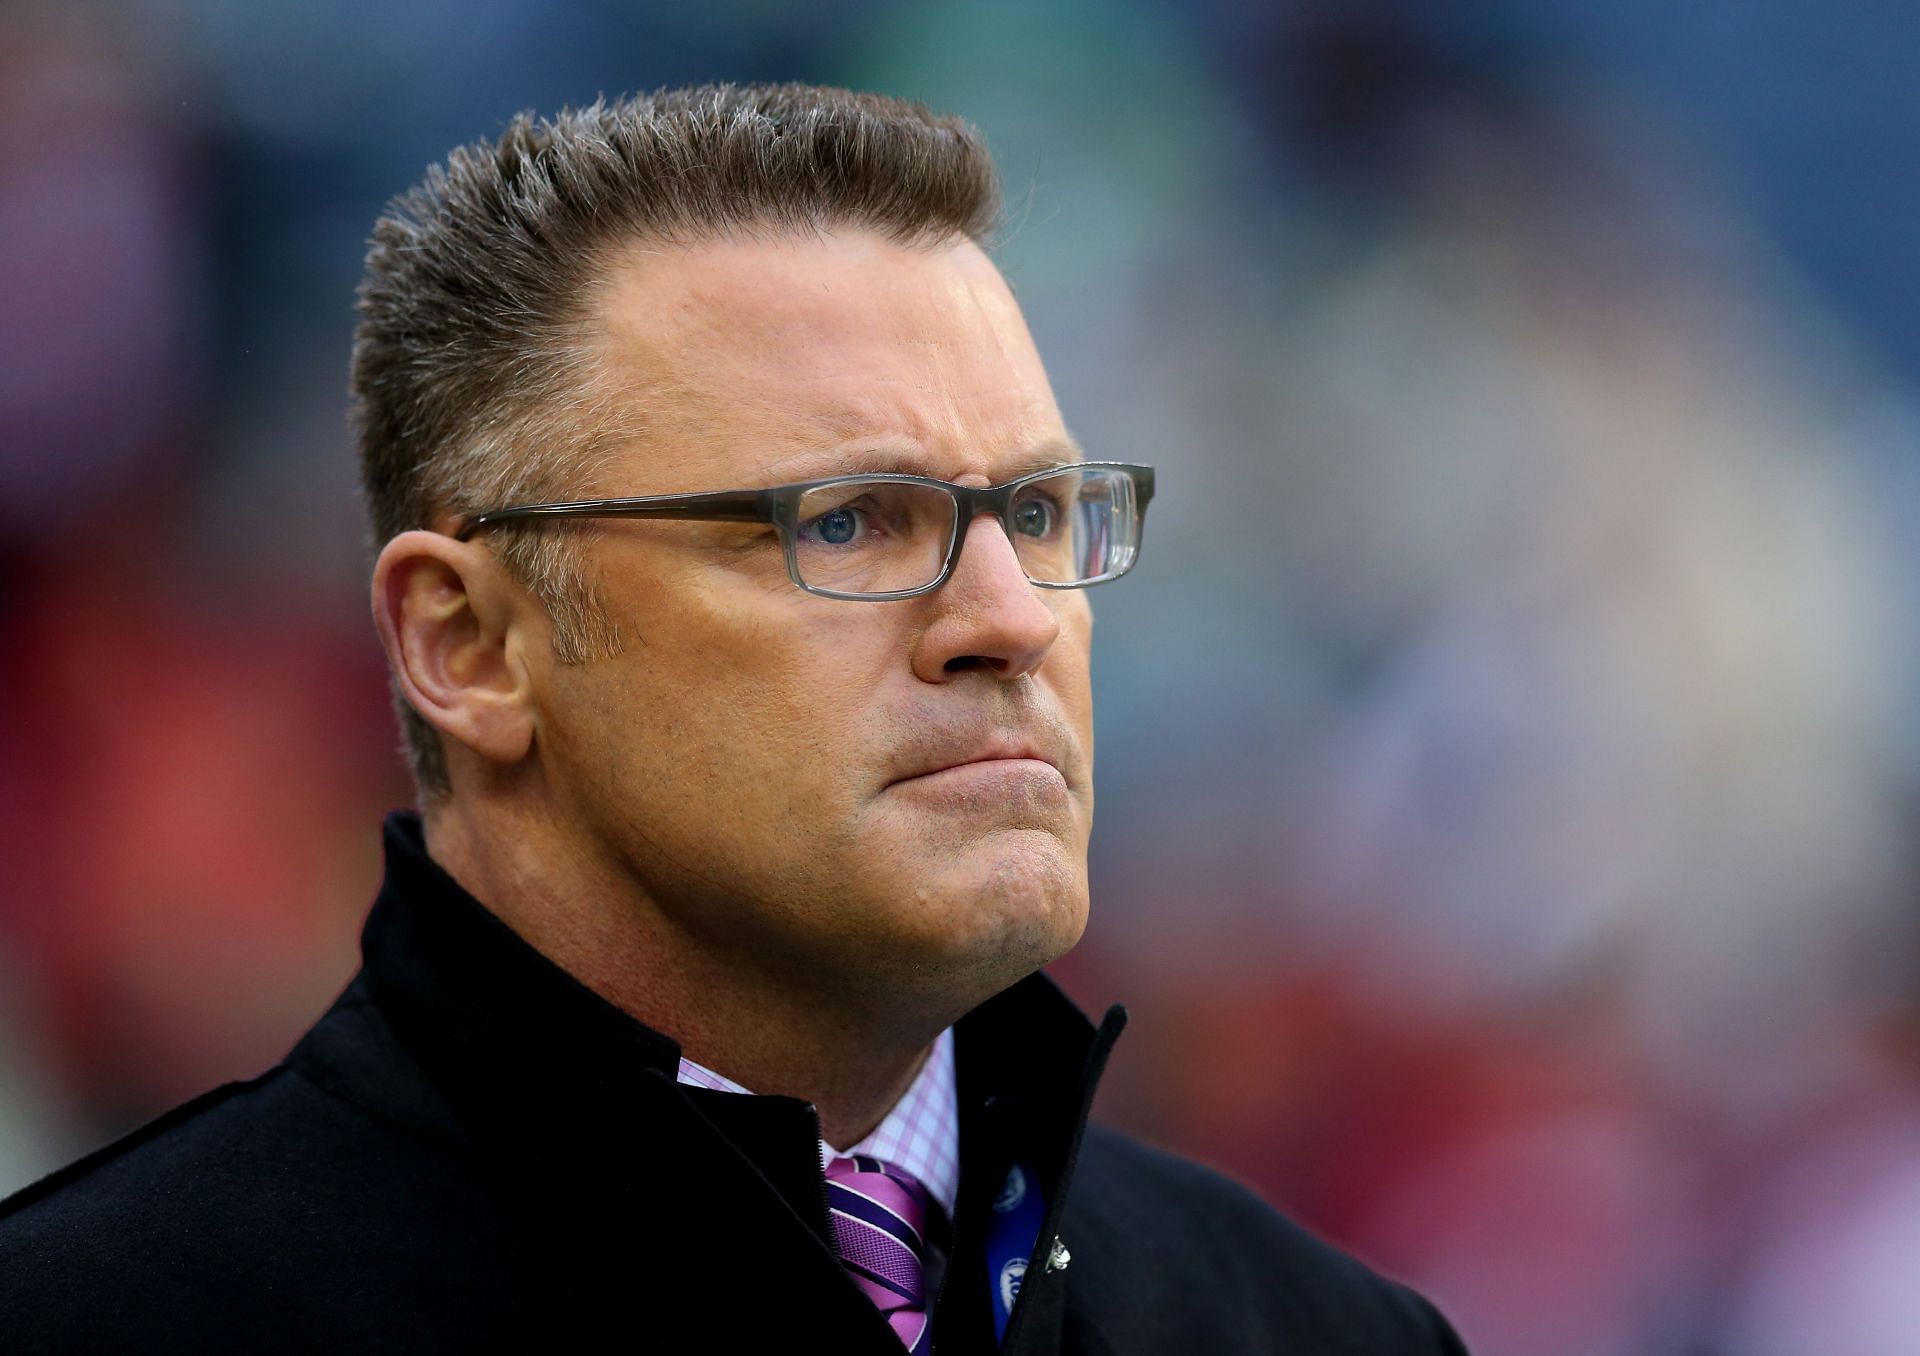 Hall of Fame defensive end Howie Long